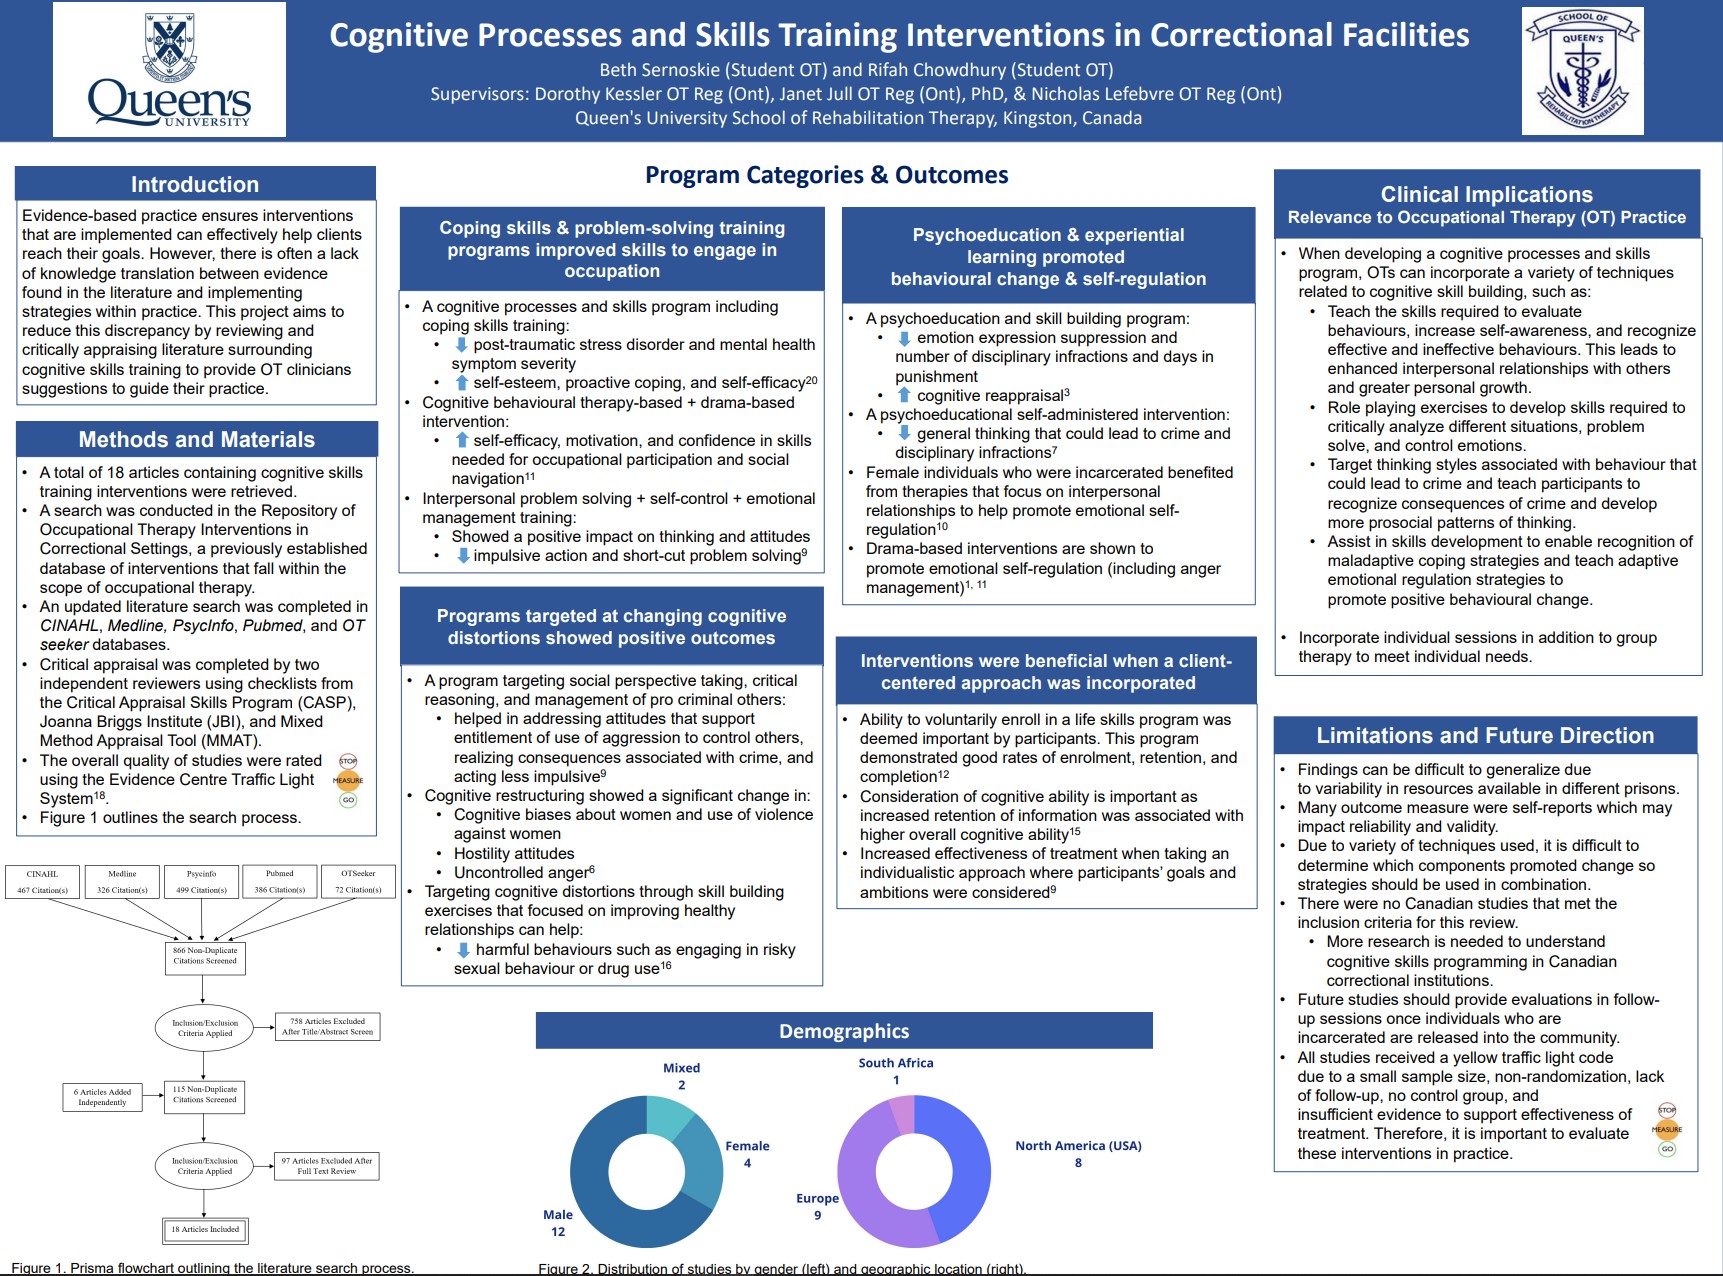 Cognitive Processes and Skills Training Interventions in Correctional Facilities 